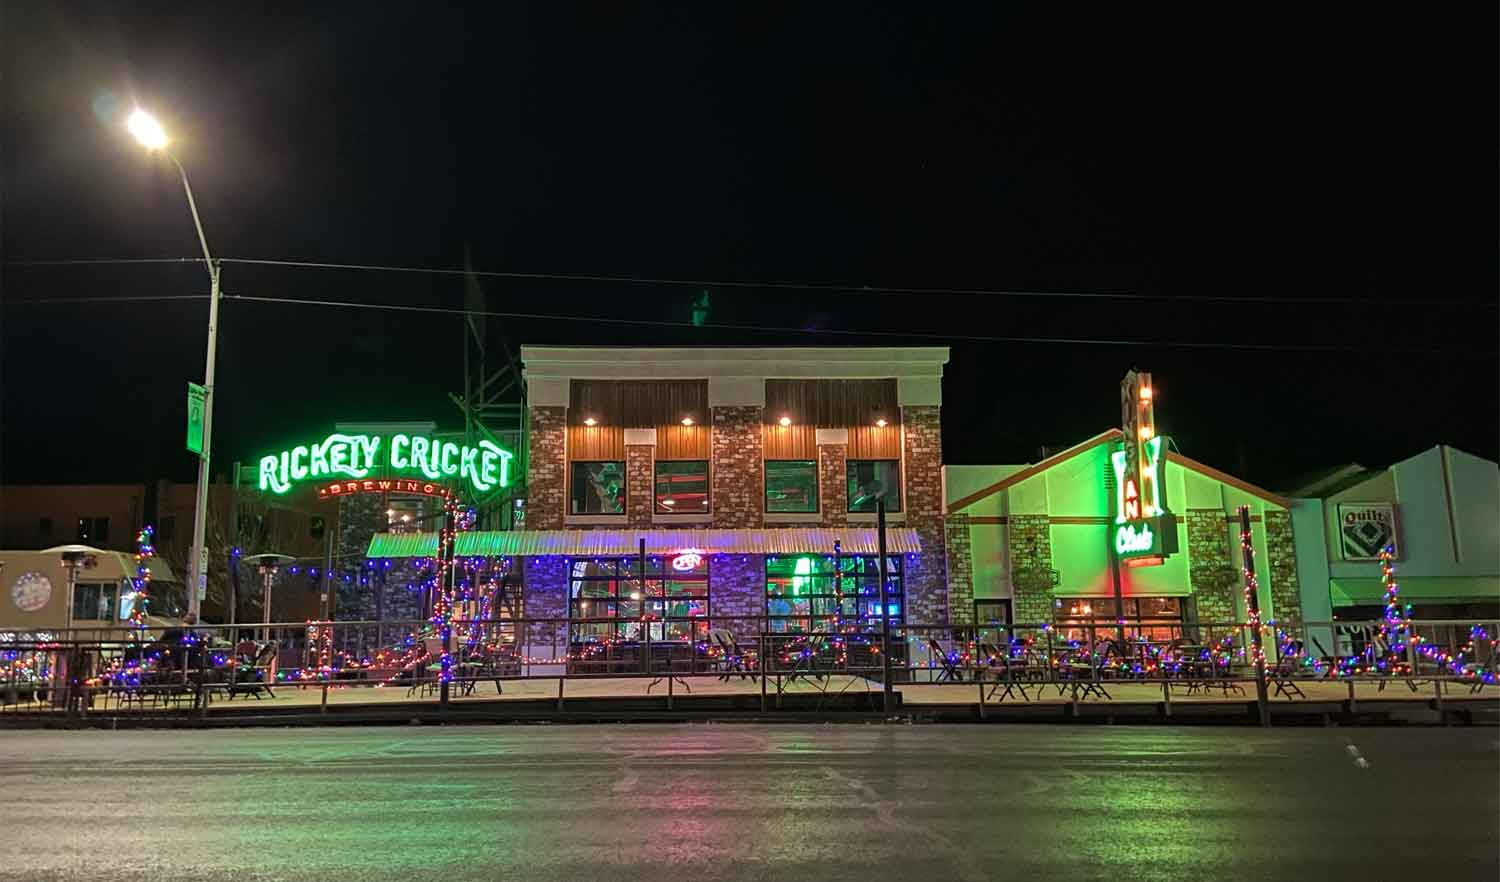 businesses at night with neon signs